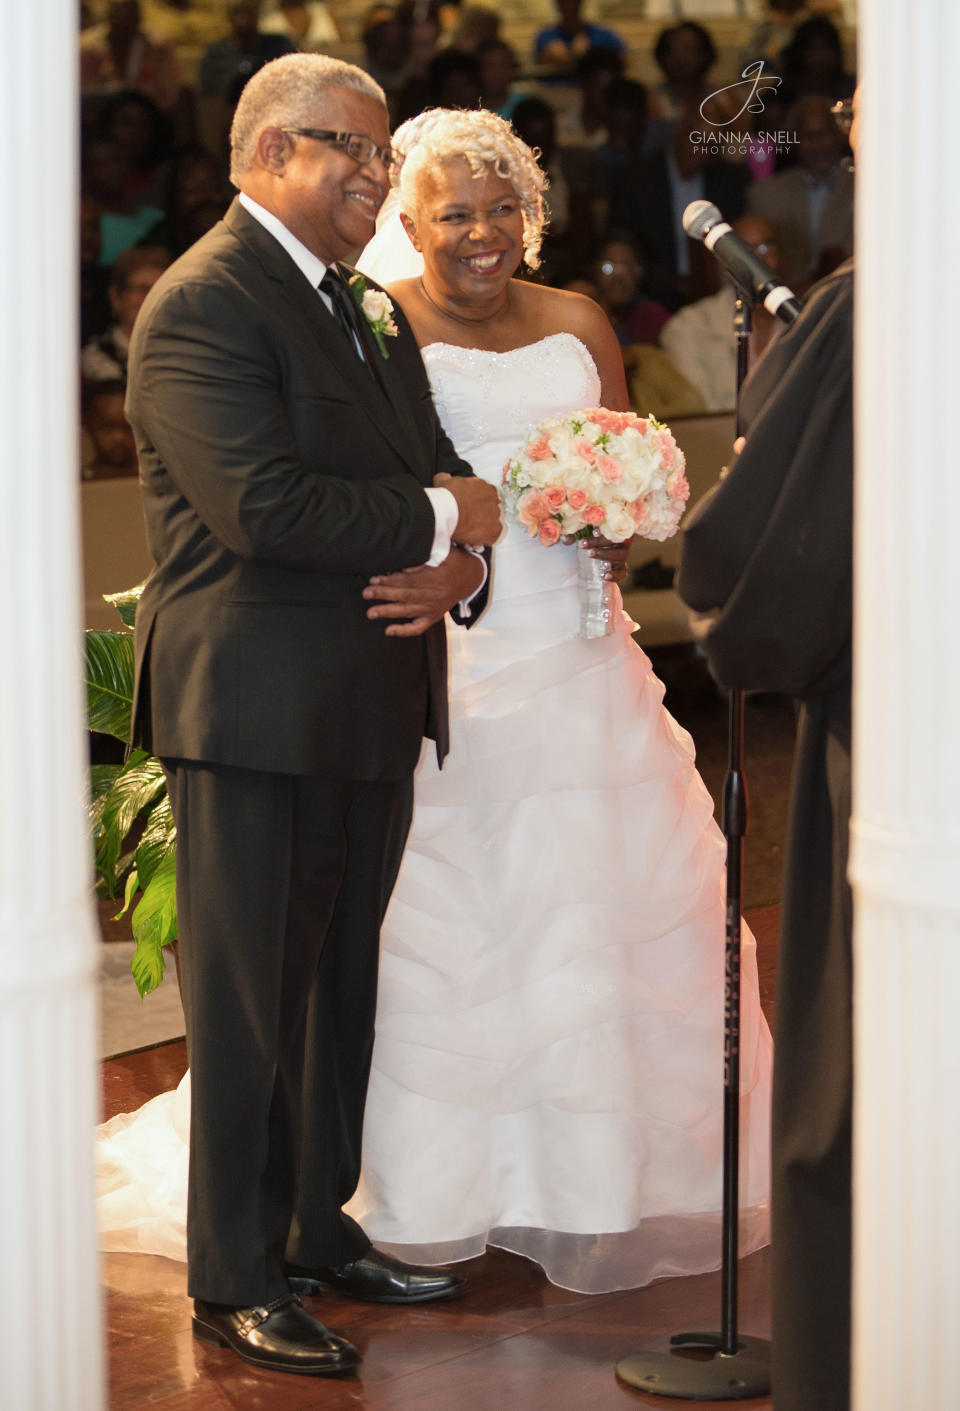 The couple married at the Huntsville church where they first met.&nbsp; (Photo: <a href="http://www.giannasnellphotography.com/" target="_blank">Gianna Snell Photography</a>)